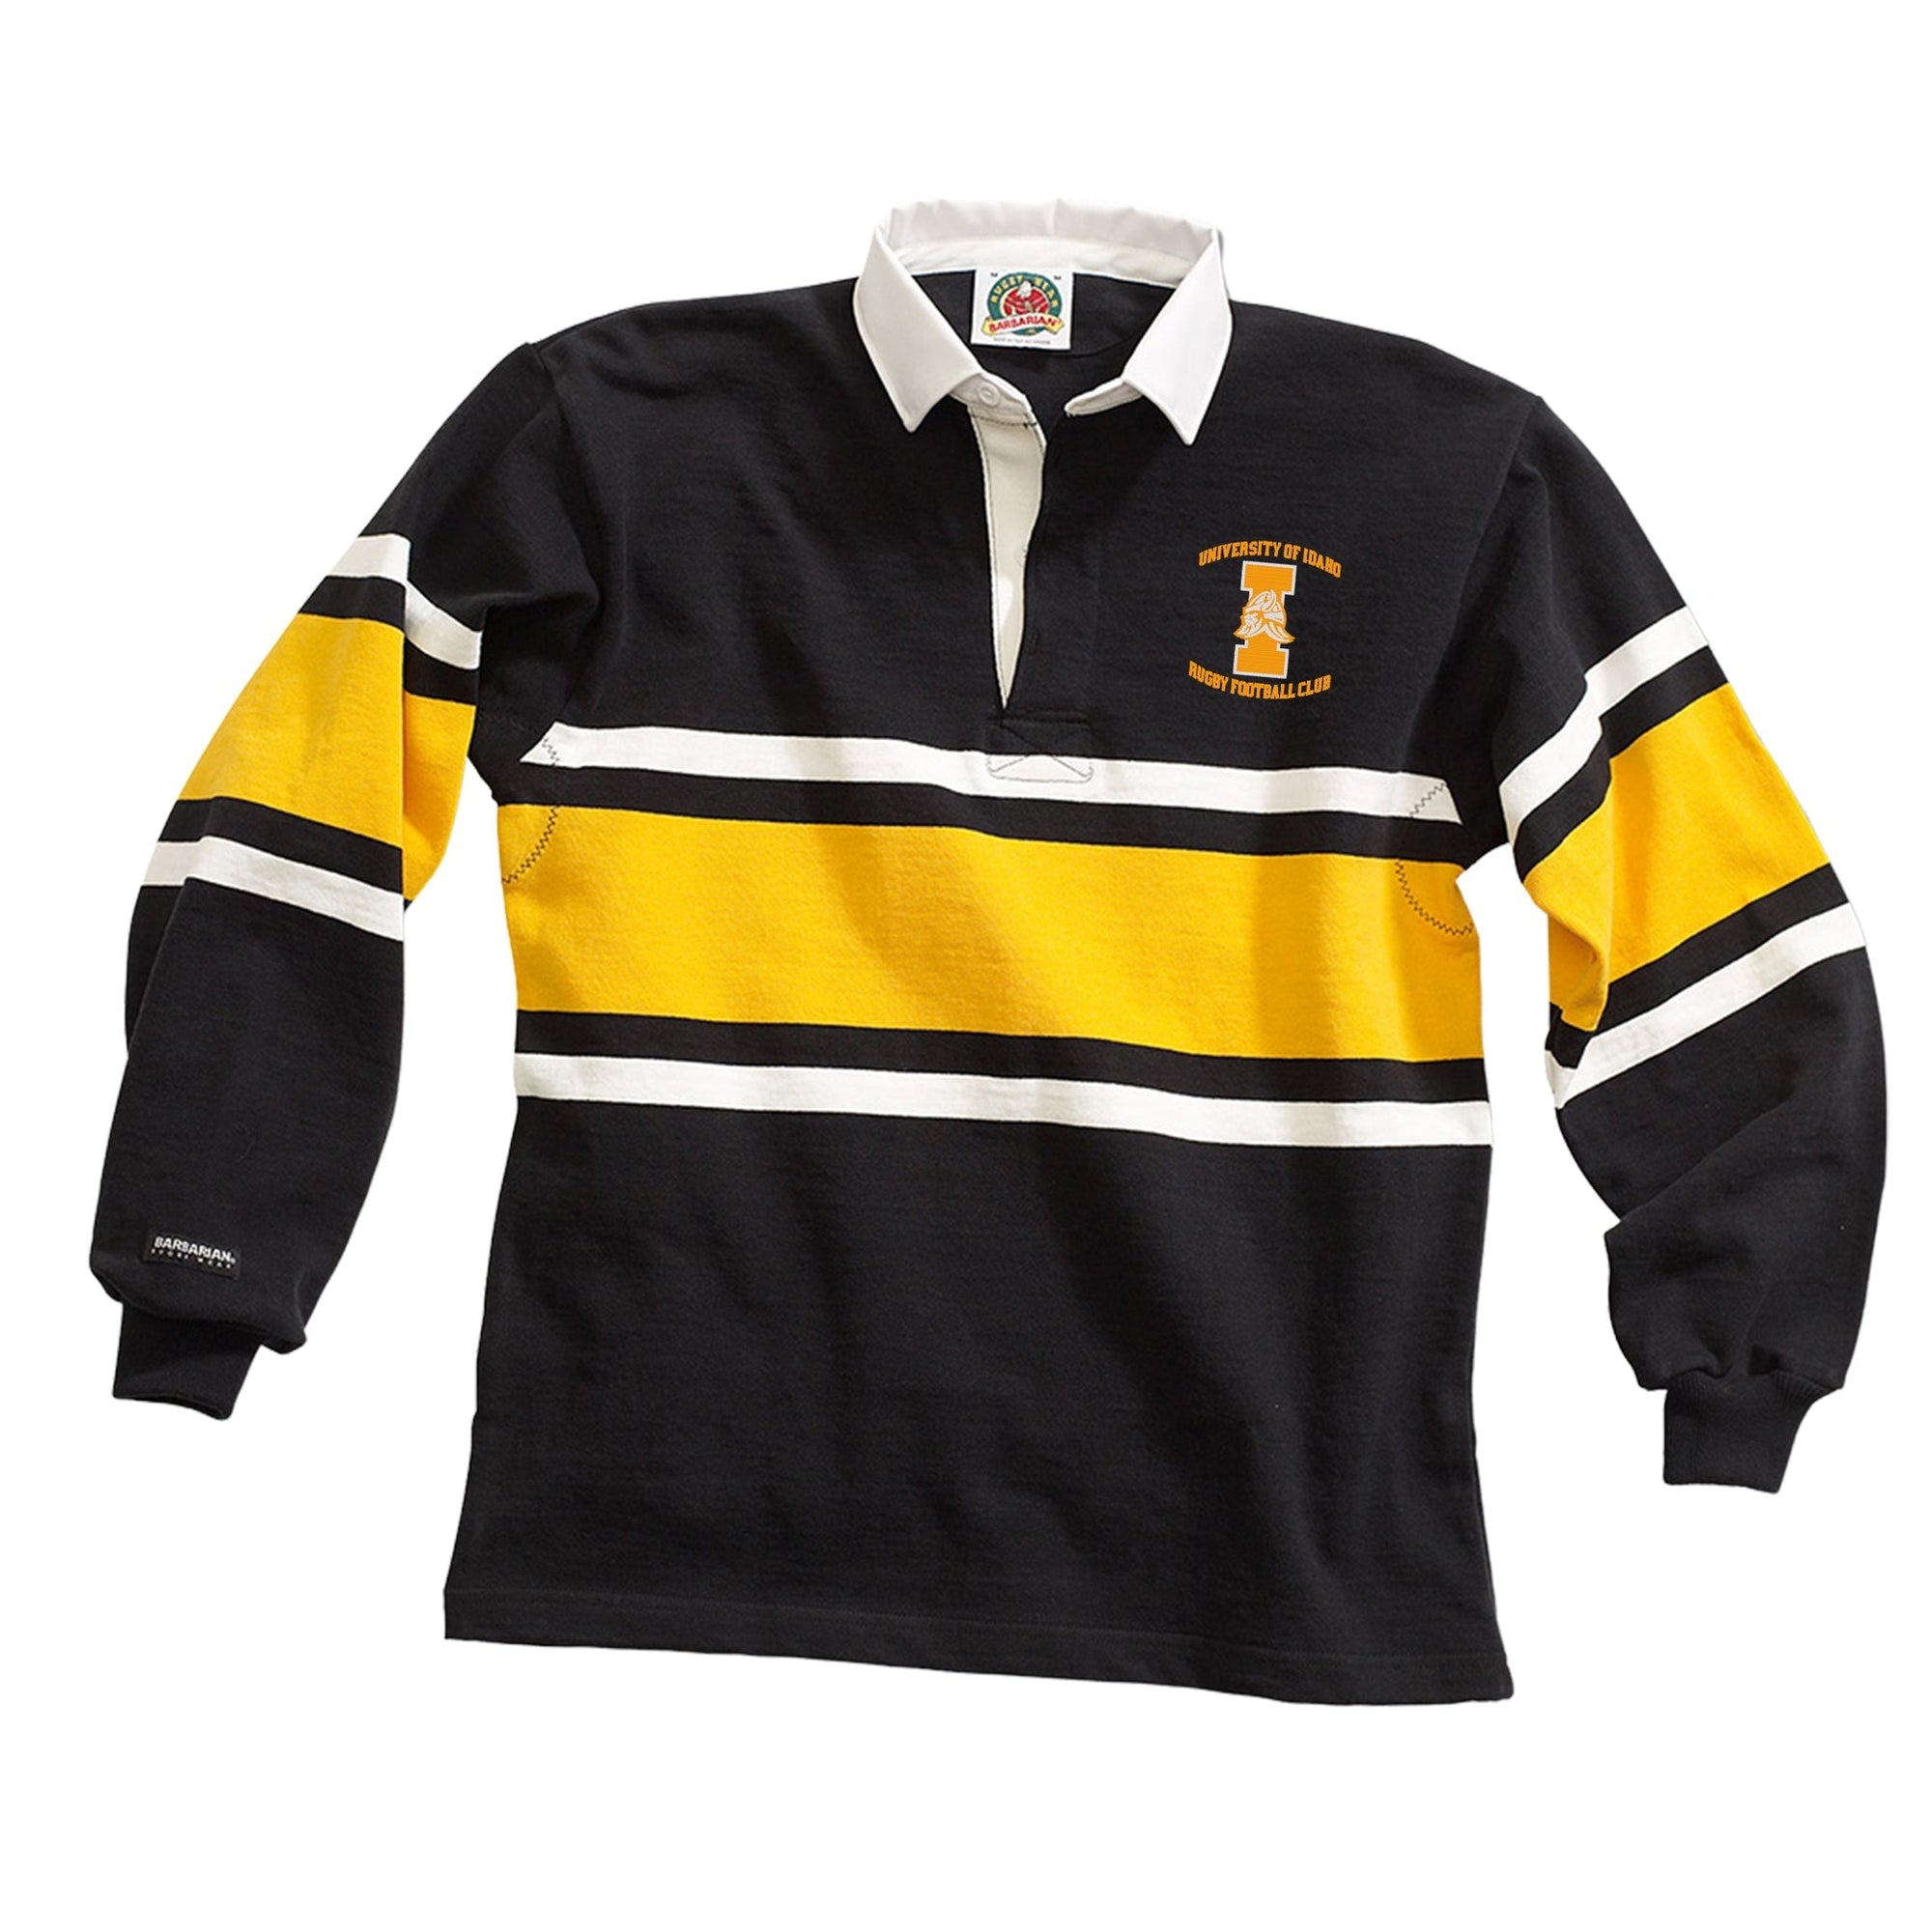 Rugby Imports UIdaho RFC Collegiate Stripe Rugby Jersey